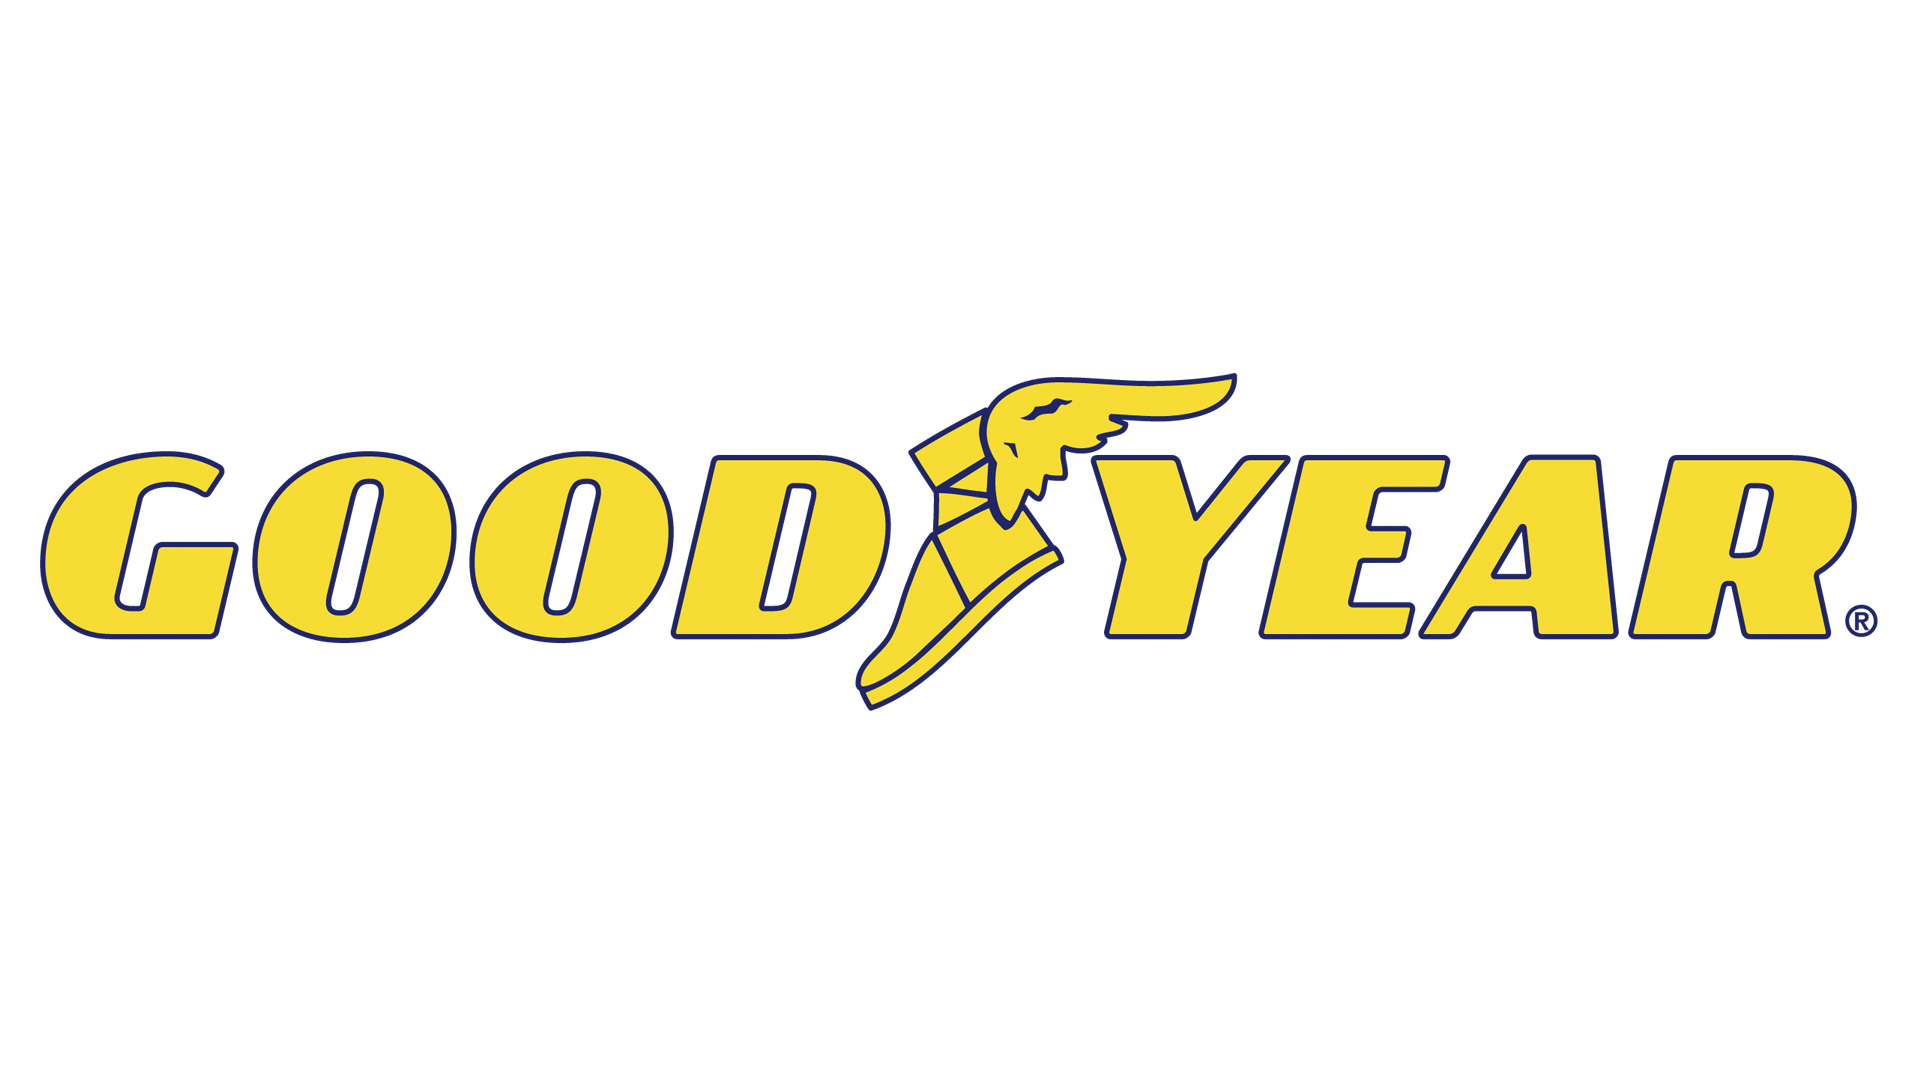 Goodyear Winged Foot Logo - Goodyear Logo, Goodyear Symbol, Meaning, History and Evolution